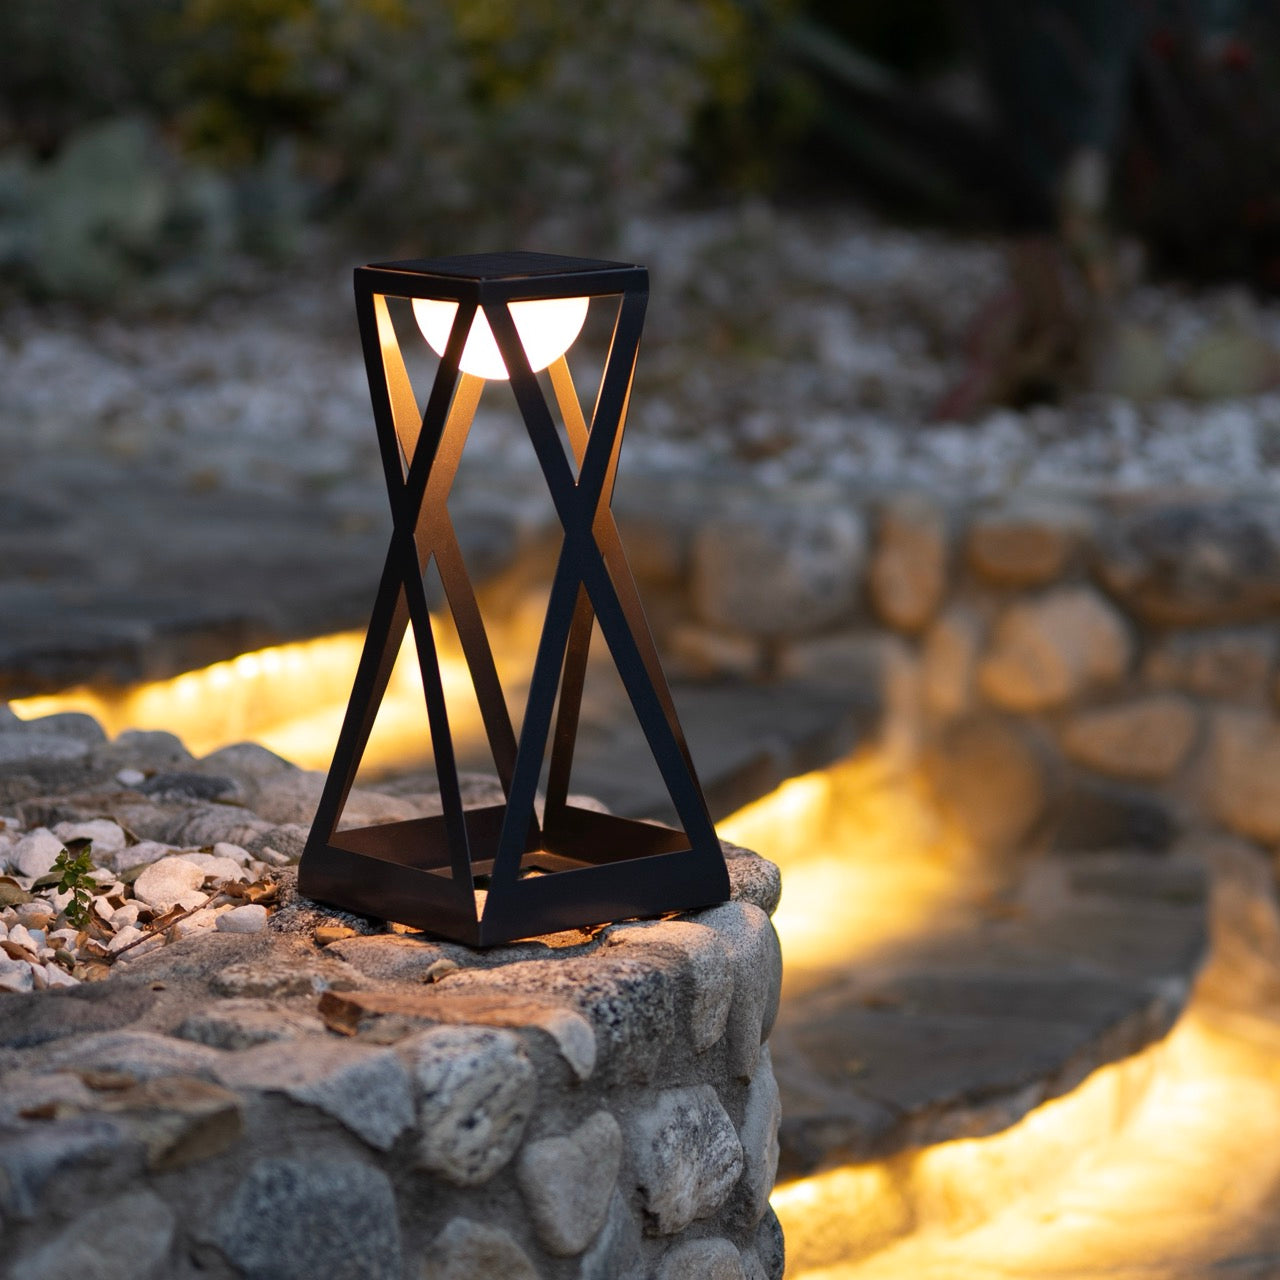 Rick solar lantern with ykary bulb outdoor on rock and steps